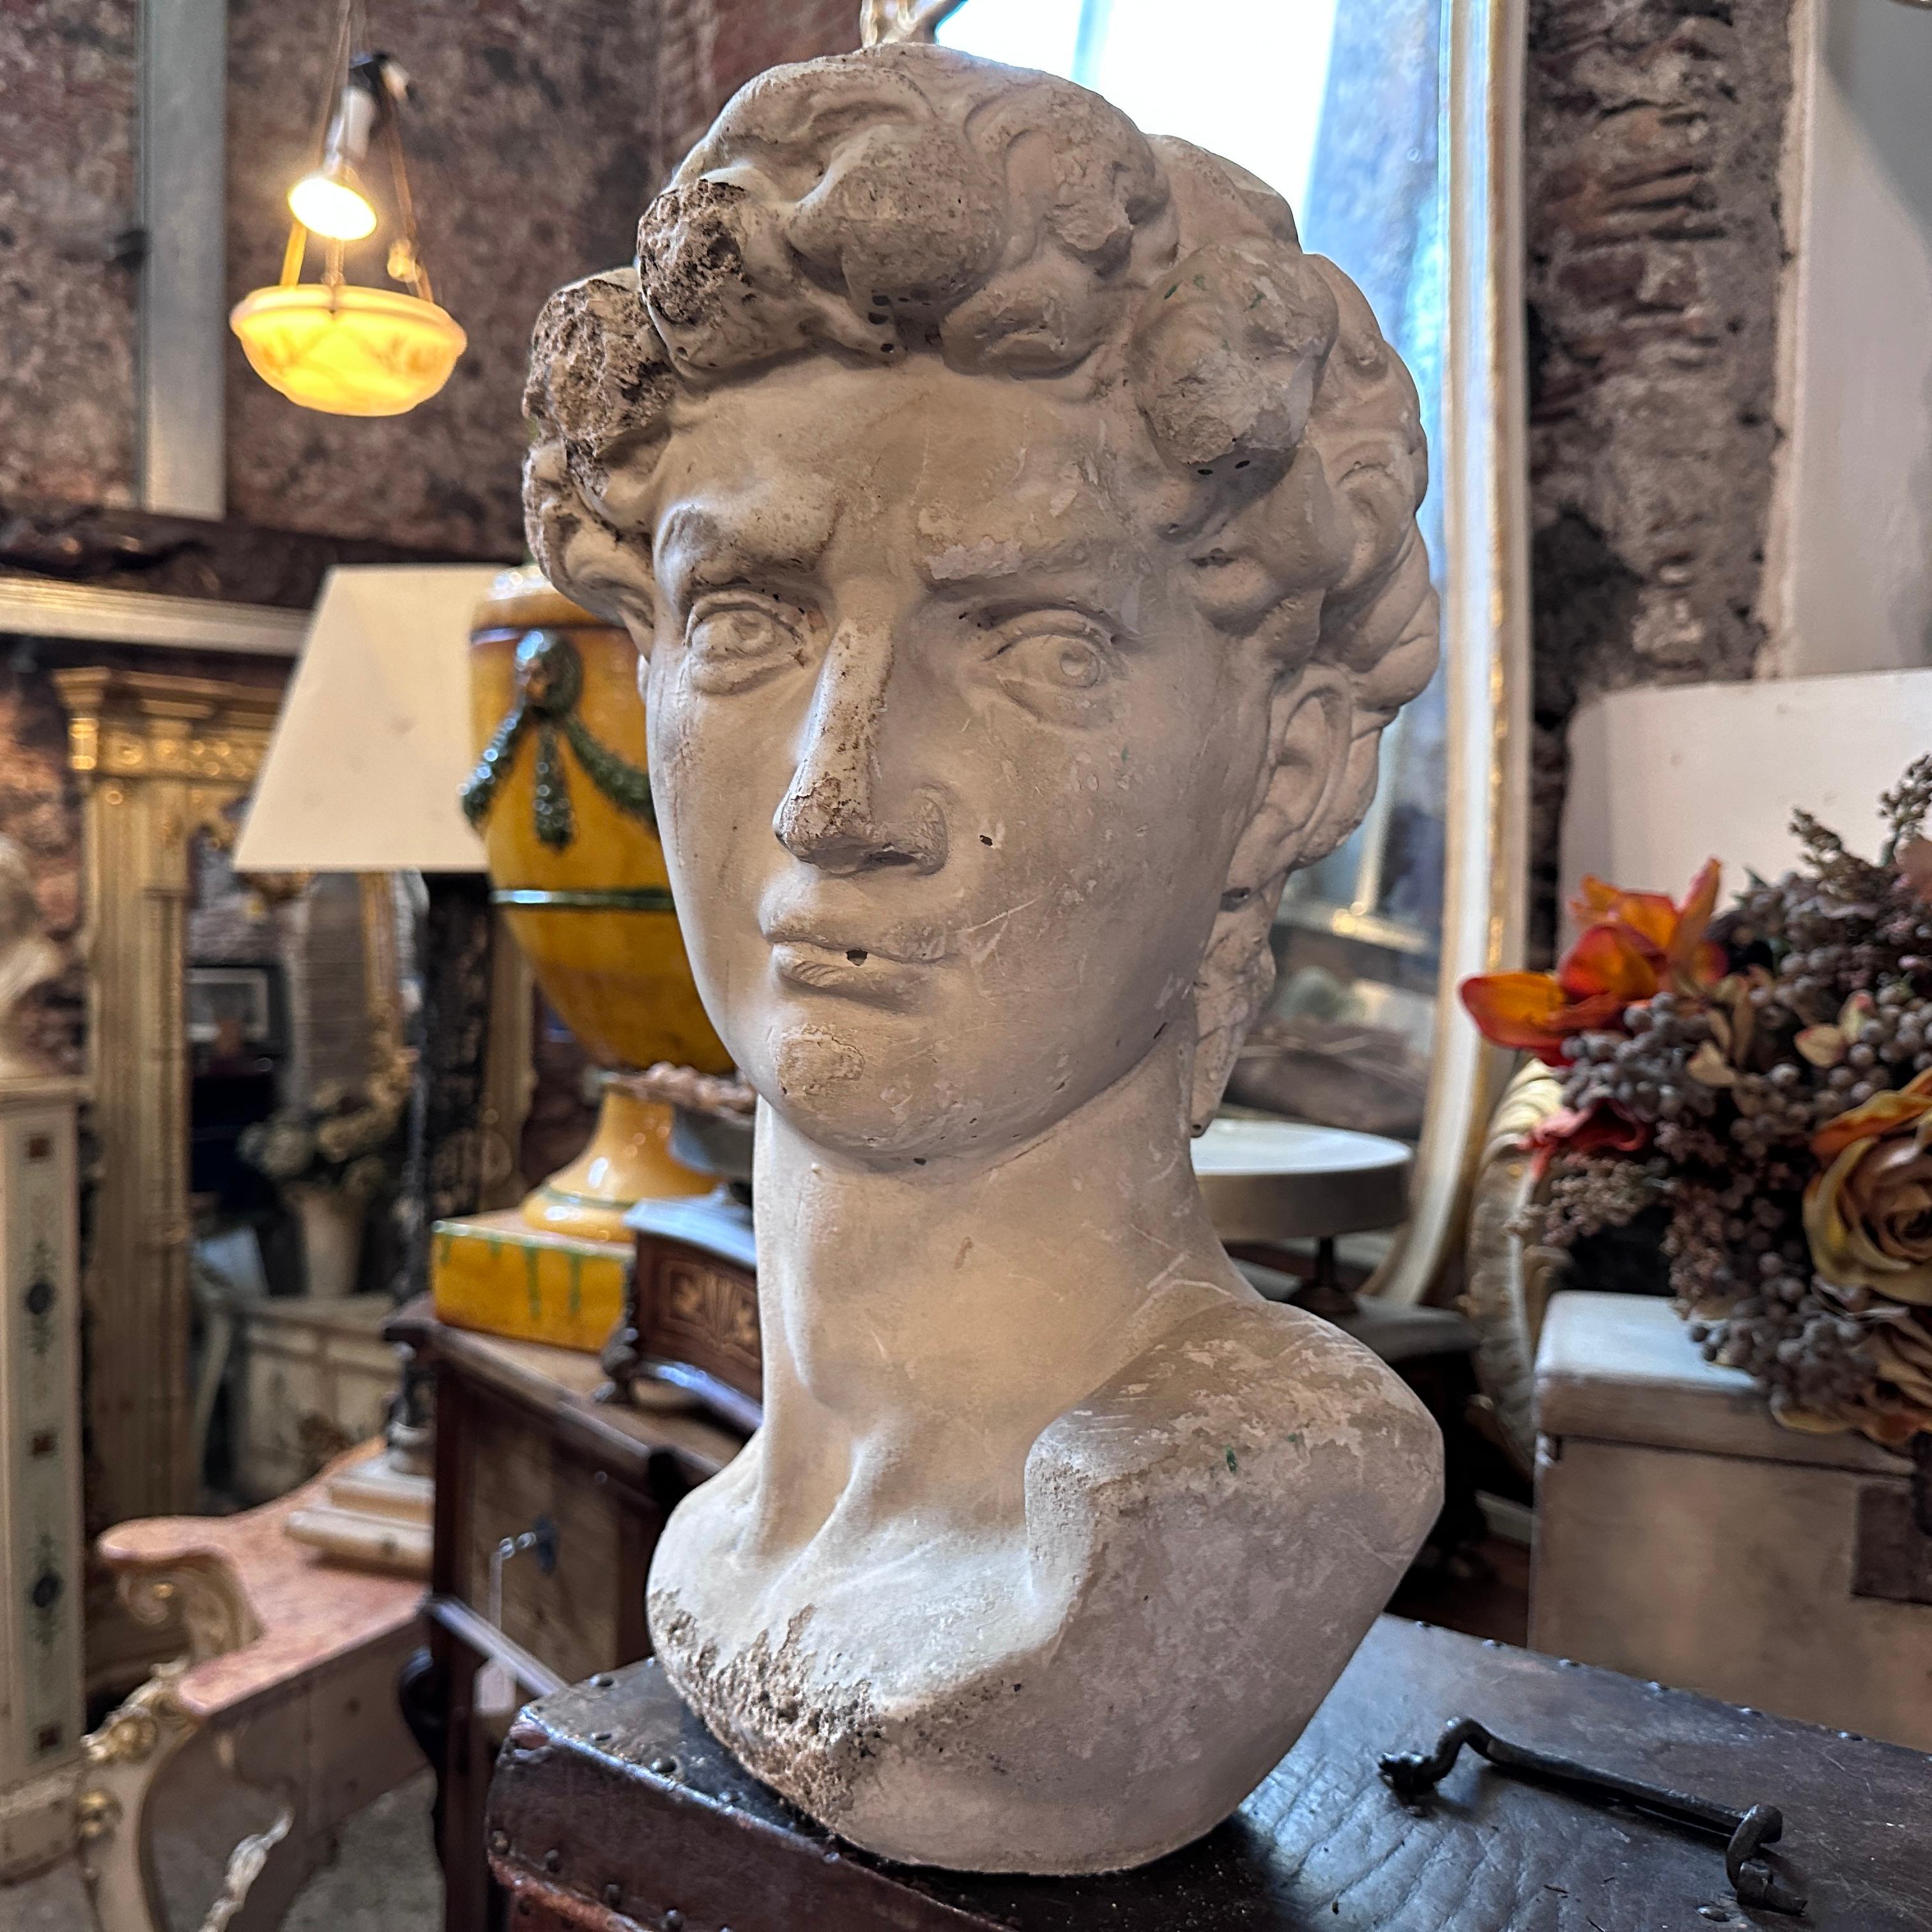 Renaissance Early 20th Century Plaster Sculpture of the Bust of David by Michelangelo